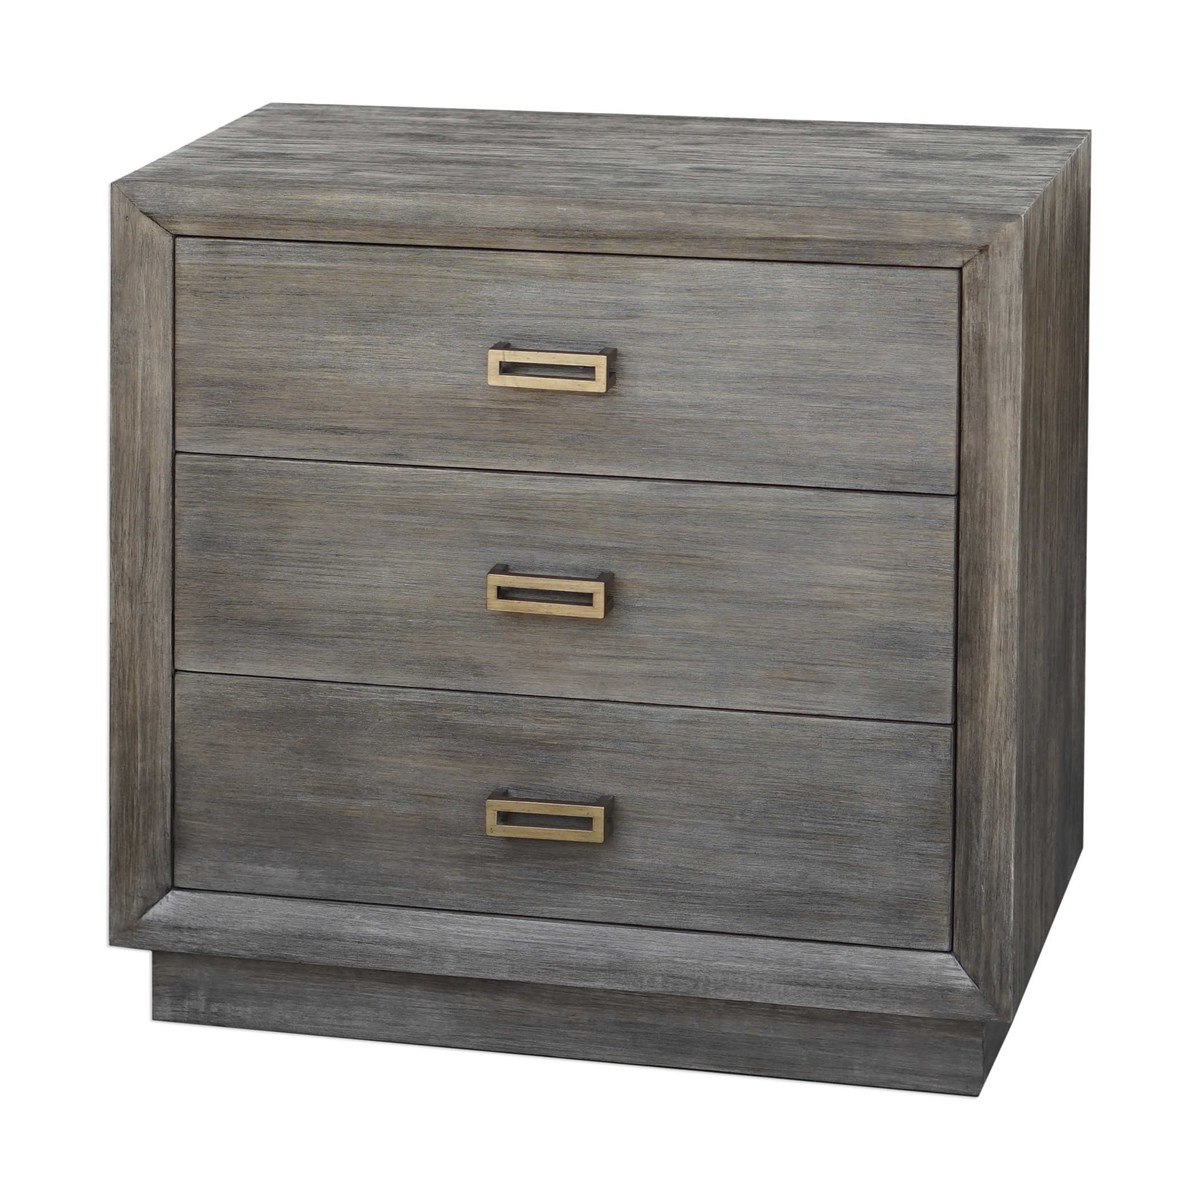 THERON ACCENT CHEST - Image 2